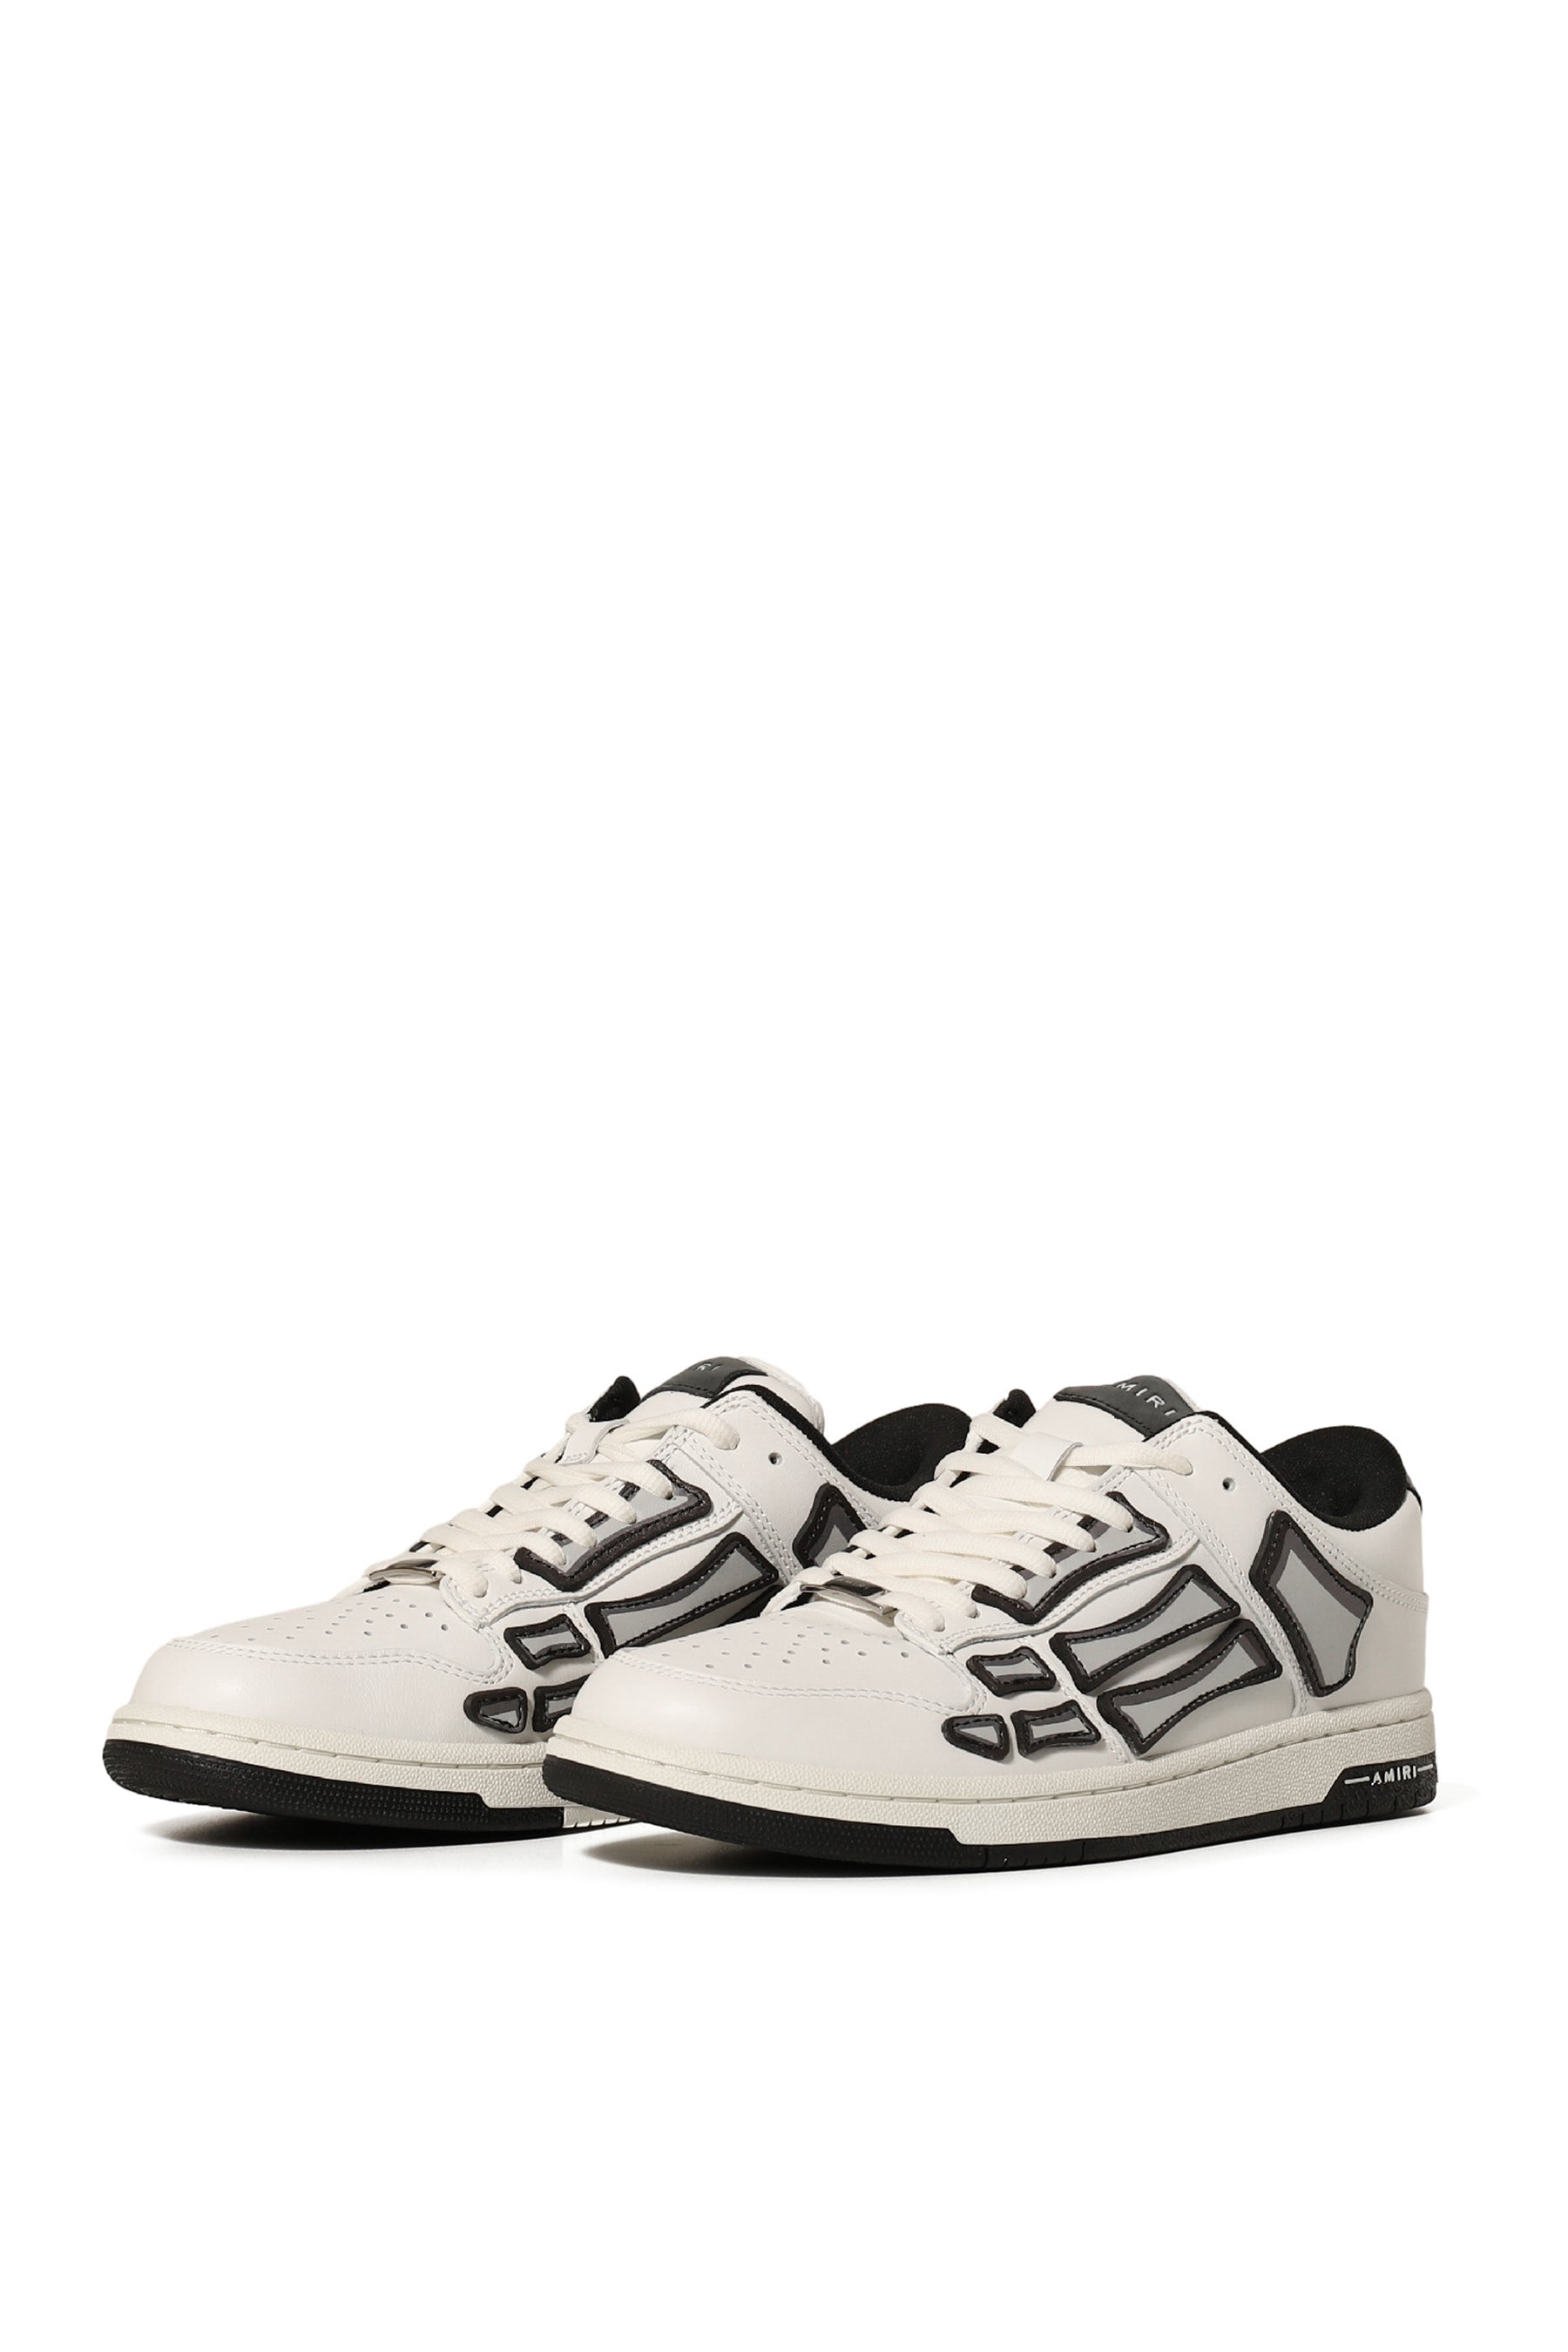 CHUNKY SKELTOP LOW / WHT BLK